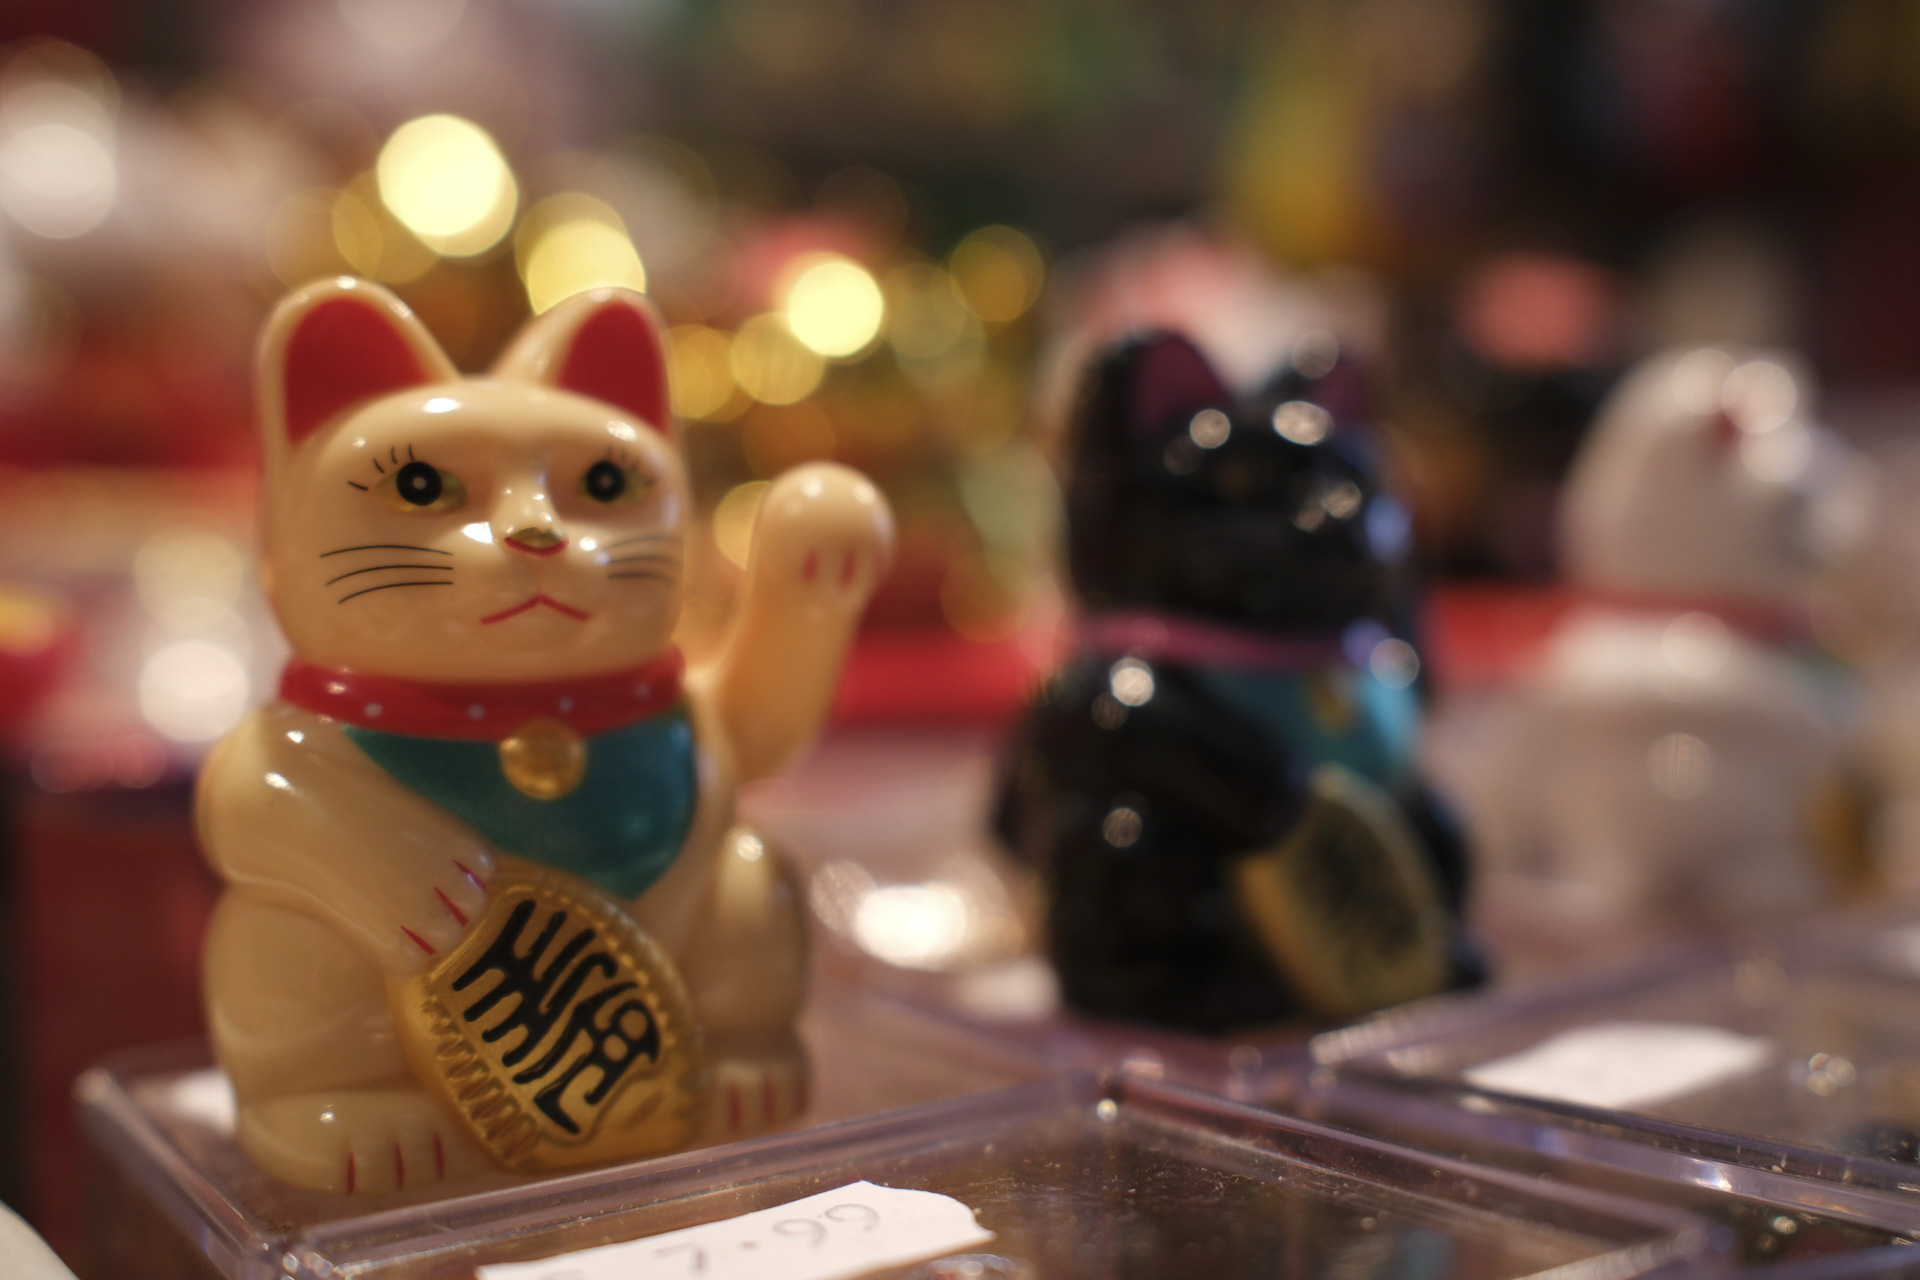 Chinese lucky cat photo taken at f/2.8 using the Fujifilm X100VI